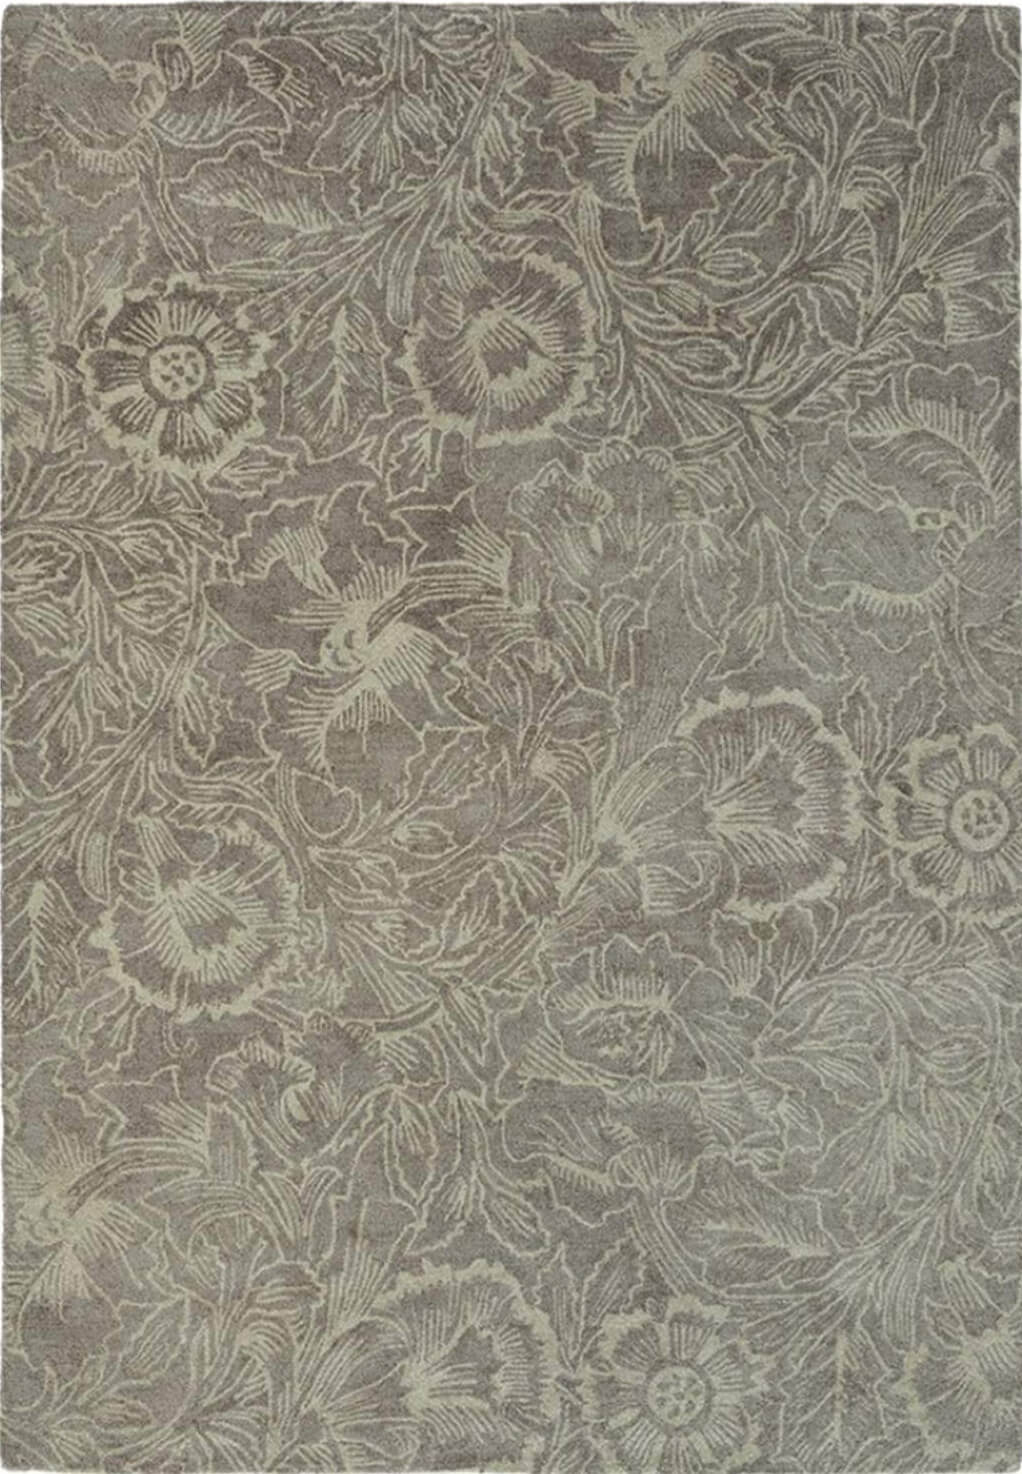 Poppy Taupe 28405 Rug by Brink & Campman